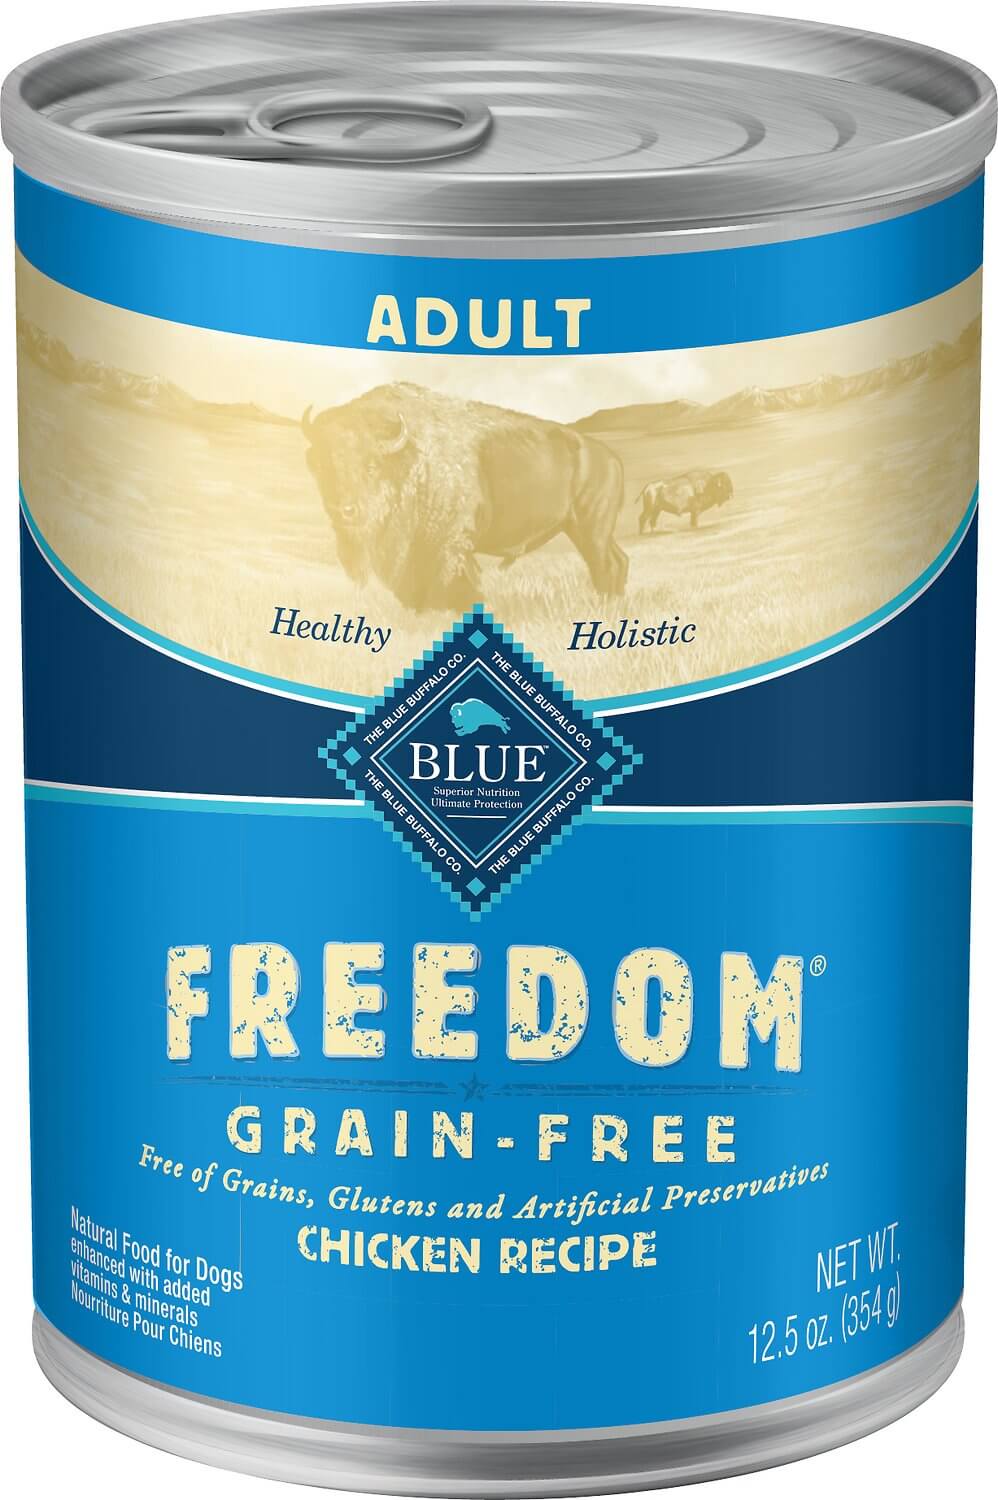 Blue Buffalo - Best Dog Food for Catahoula Leopards